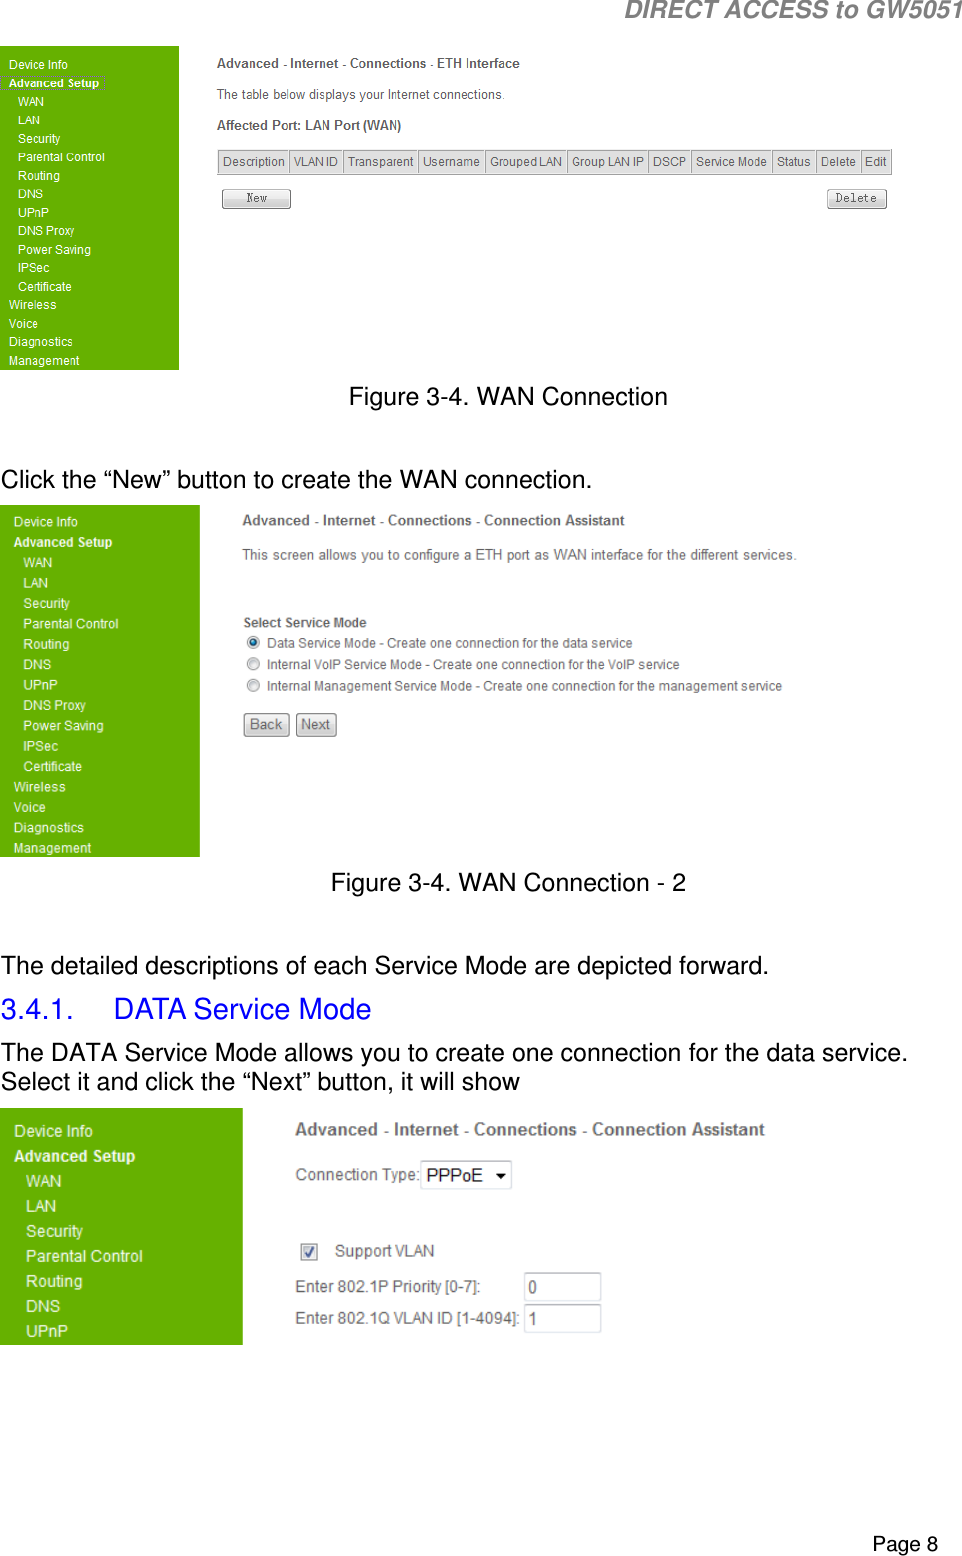                                                                                                                                                                                                                           DIRECT ACCESS to GW5051    Page 8  Figure 3-4. WAN Connection  Click the “New” button to create the WAN connection.  Figure 3-4. WAN Connection - 2  The detailed descriptions of each Service Mode are depicted forward. 3.4.1.  DATA Service Mode The DATA Service Mode allows you to create one connection for the data service. Select it and click the “Next” button, it will show  